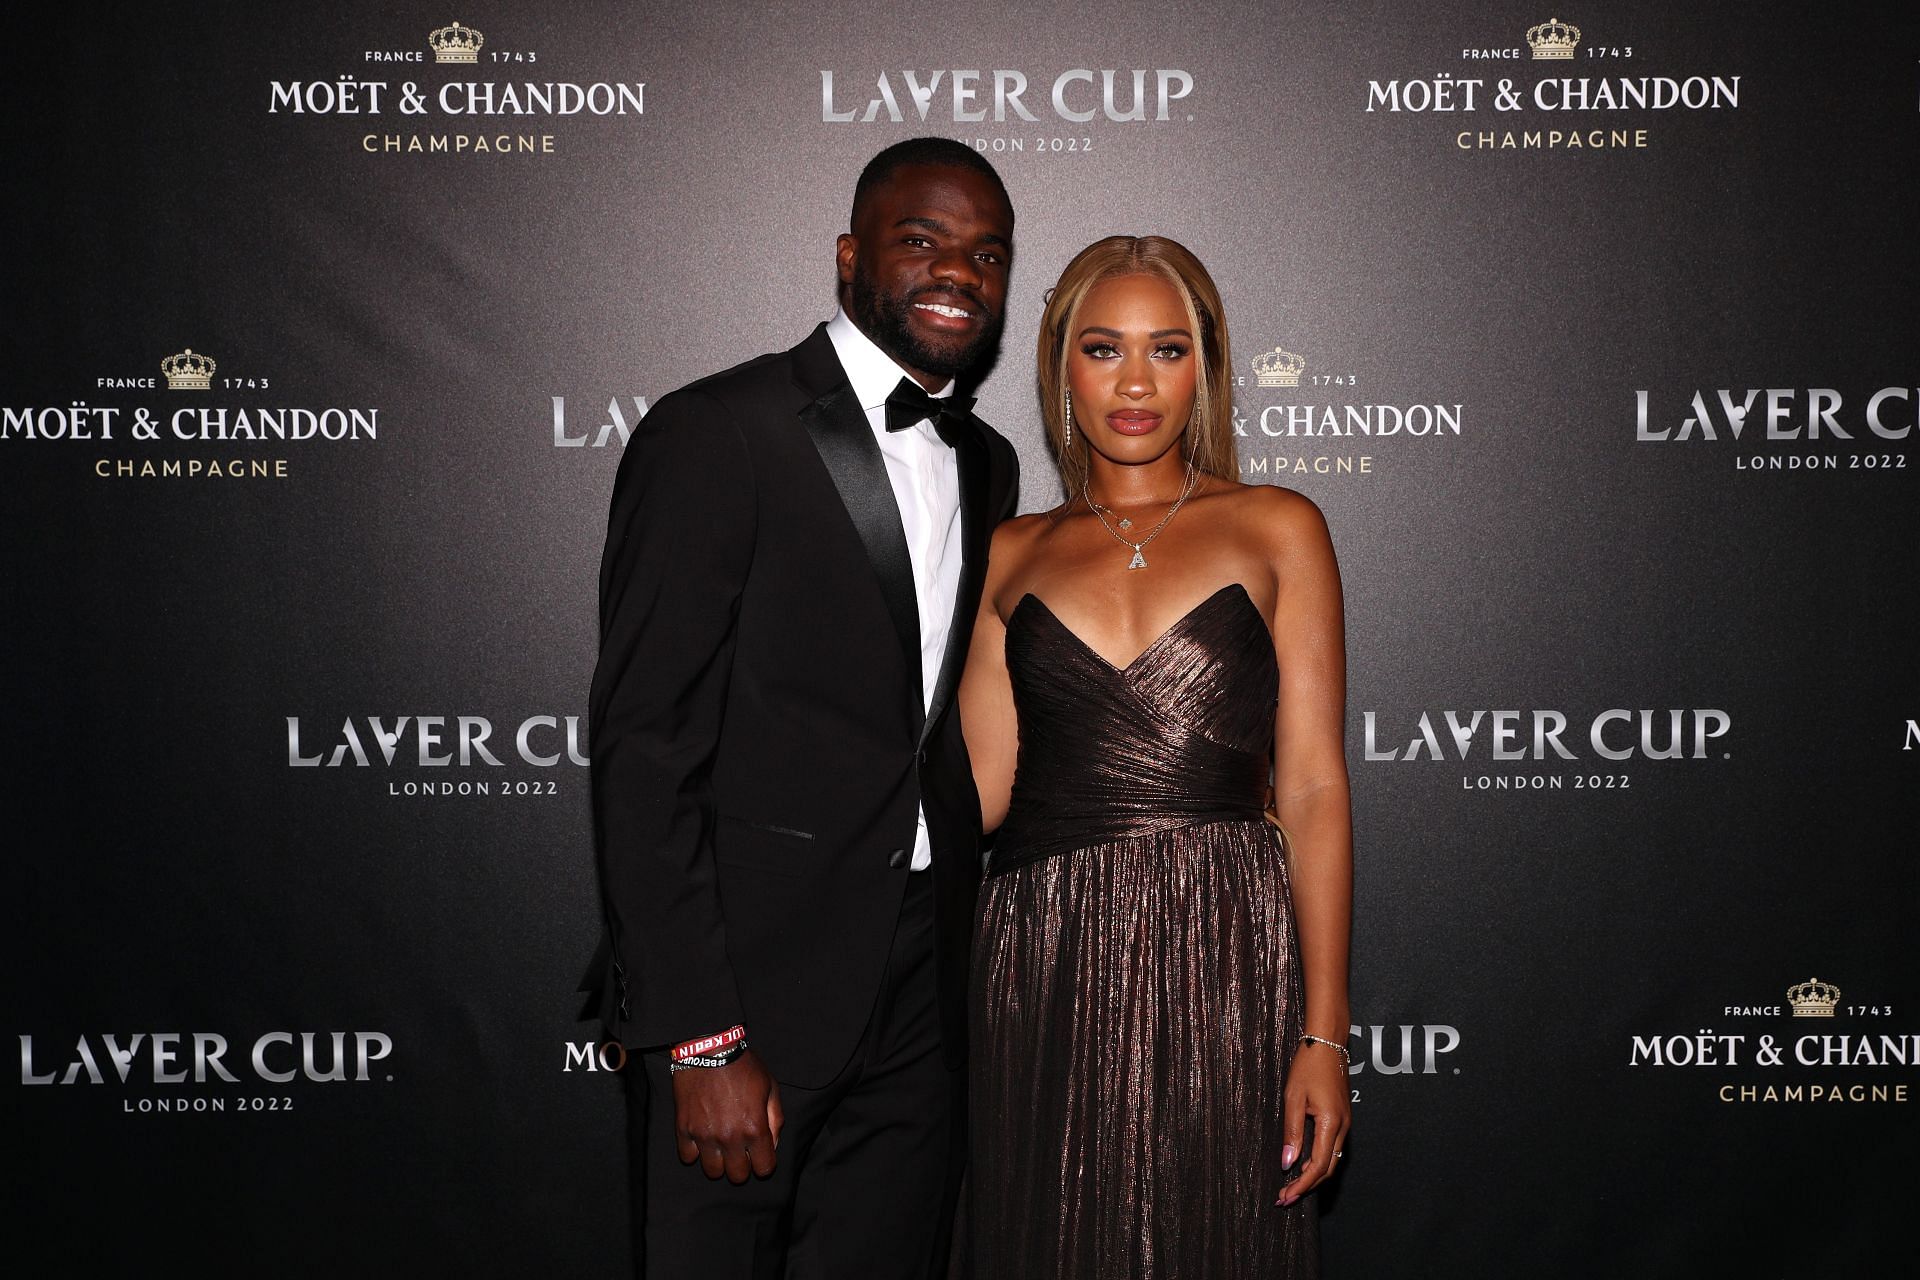 Frances Tiafoe and girlfriend Ayan Broomfield at the 2022 Laver Cup Previews